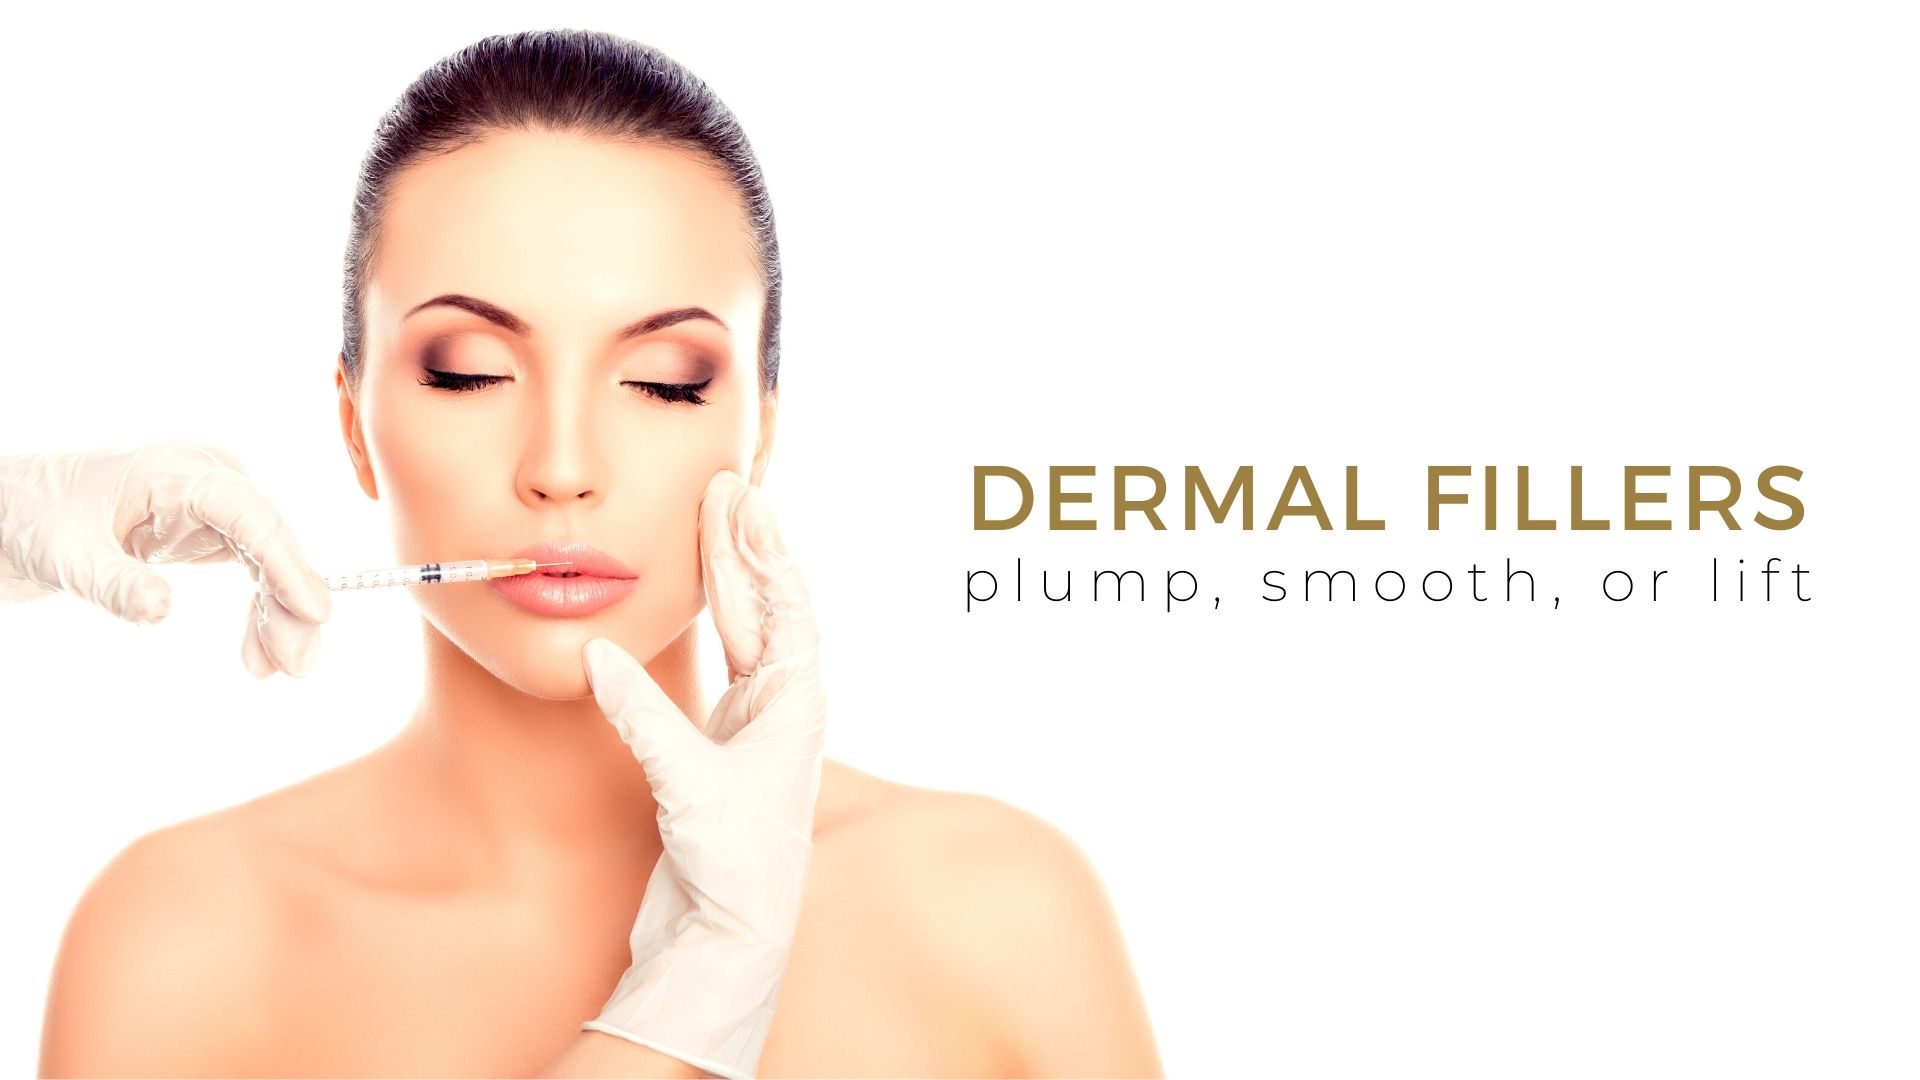 Make Your Skin Healthy and Restore Natural Beauty with Revolutionary Dermal Fillers Joondalup Treatments